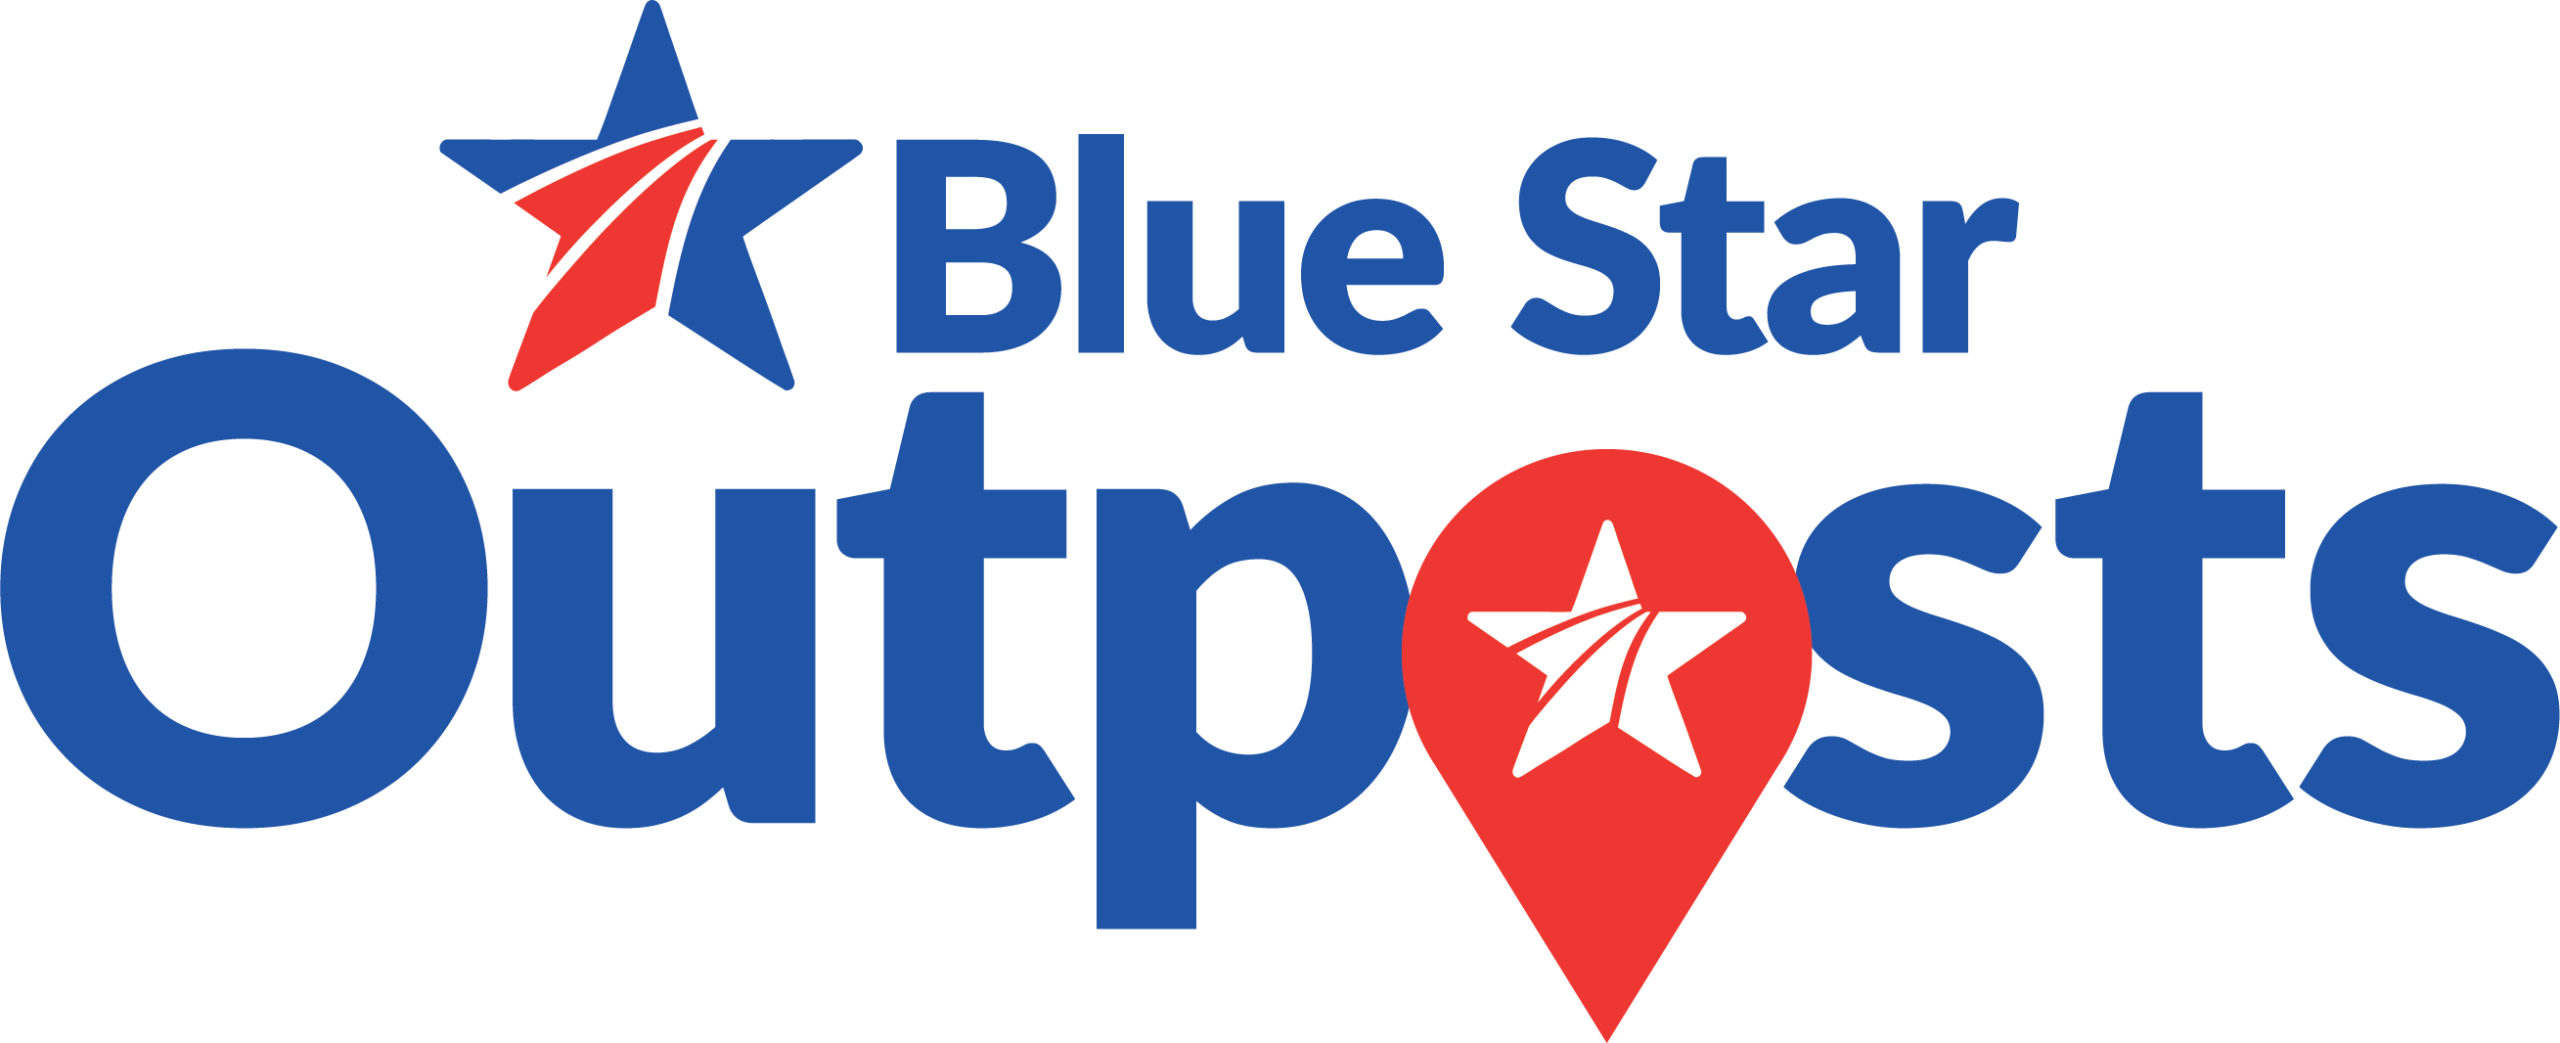 Blue Star Outposts